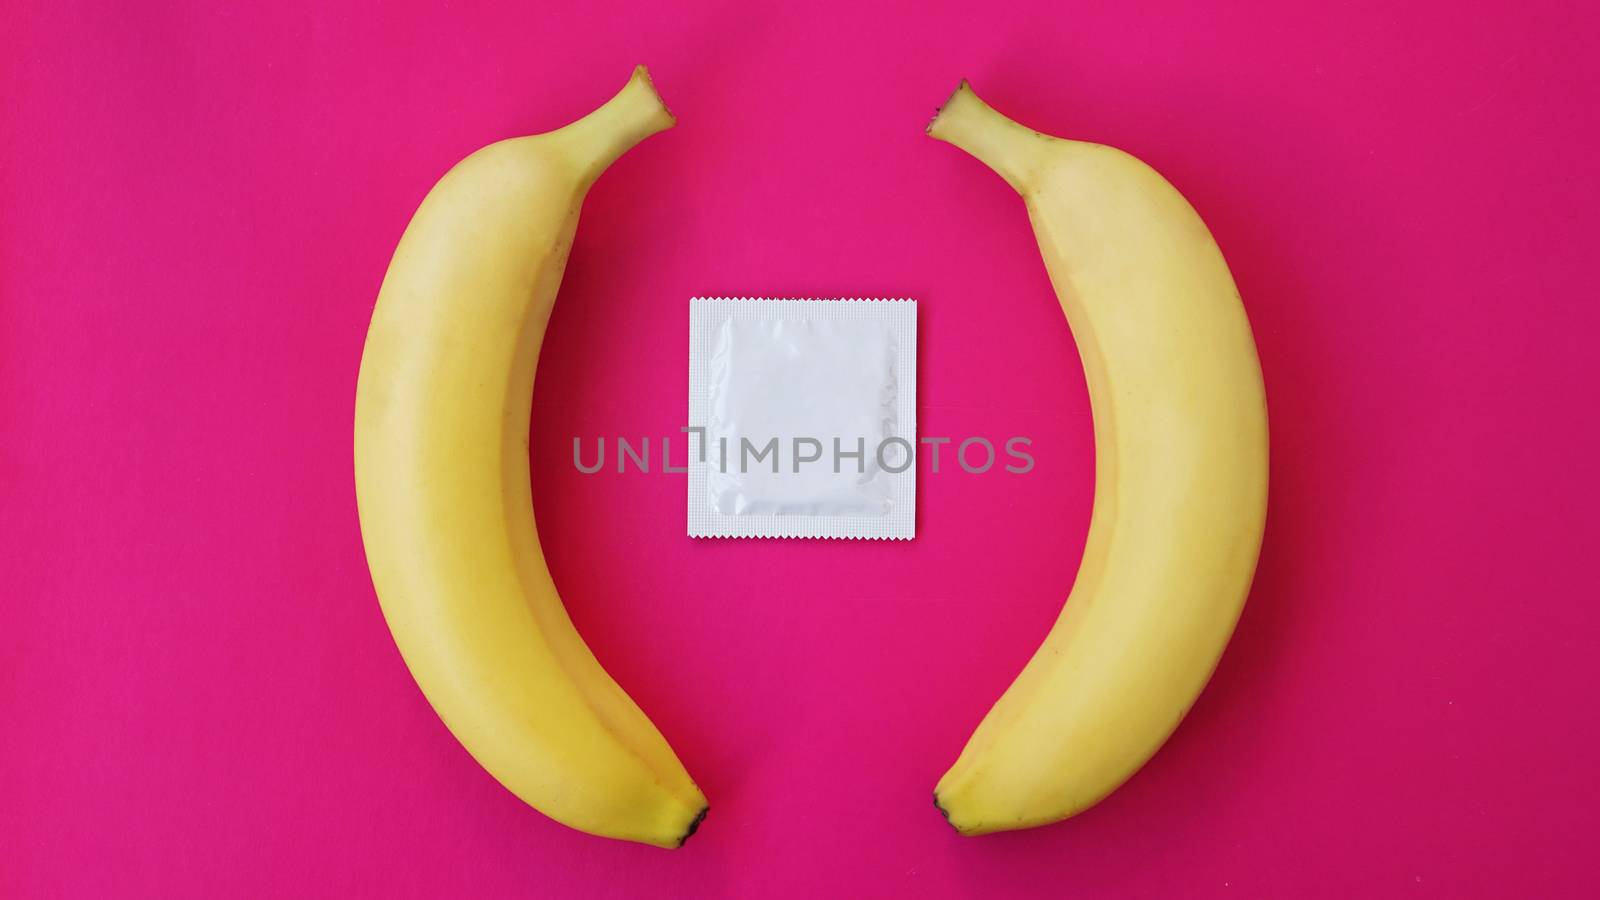 Condoms and two bananas together, the concept of contraceptives and the prevention of venereal diseases of same-sex marriage.